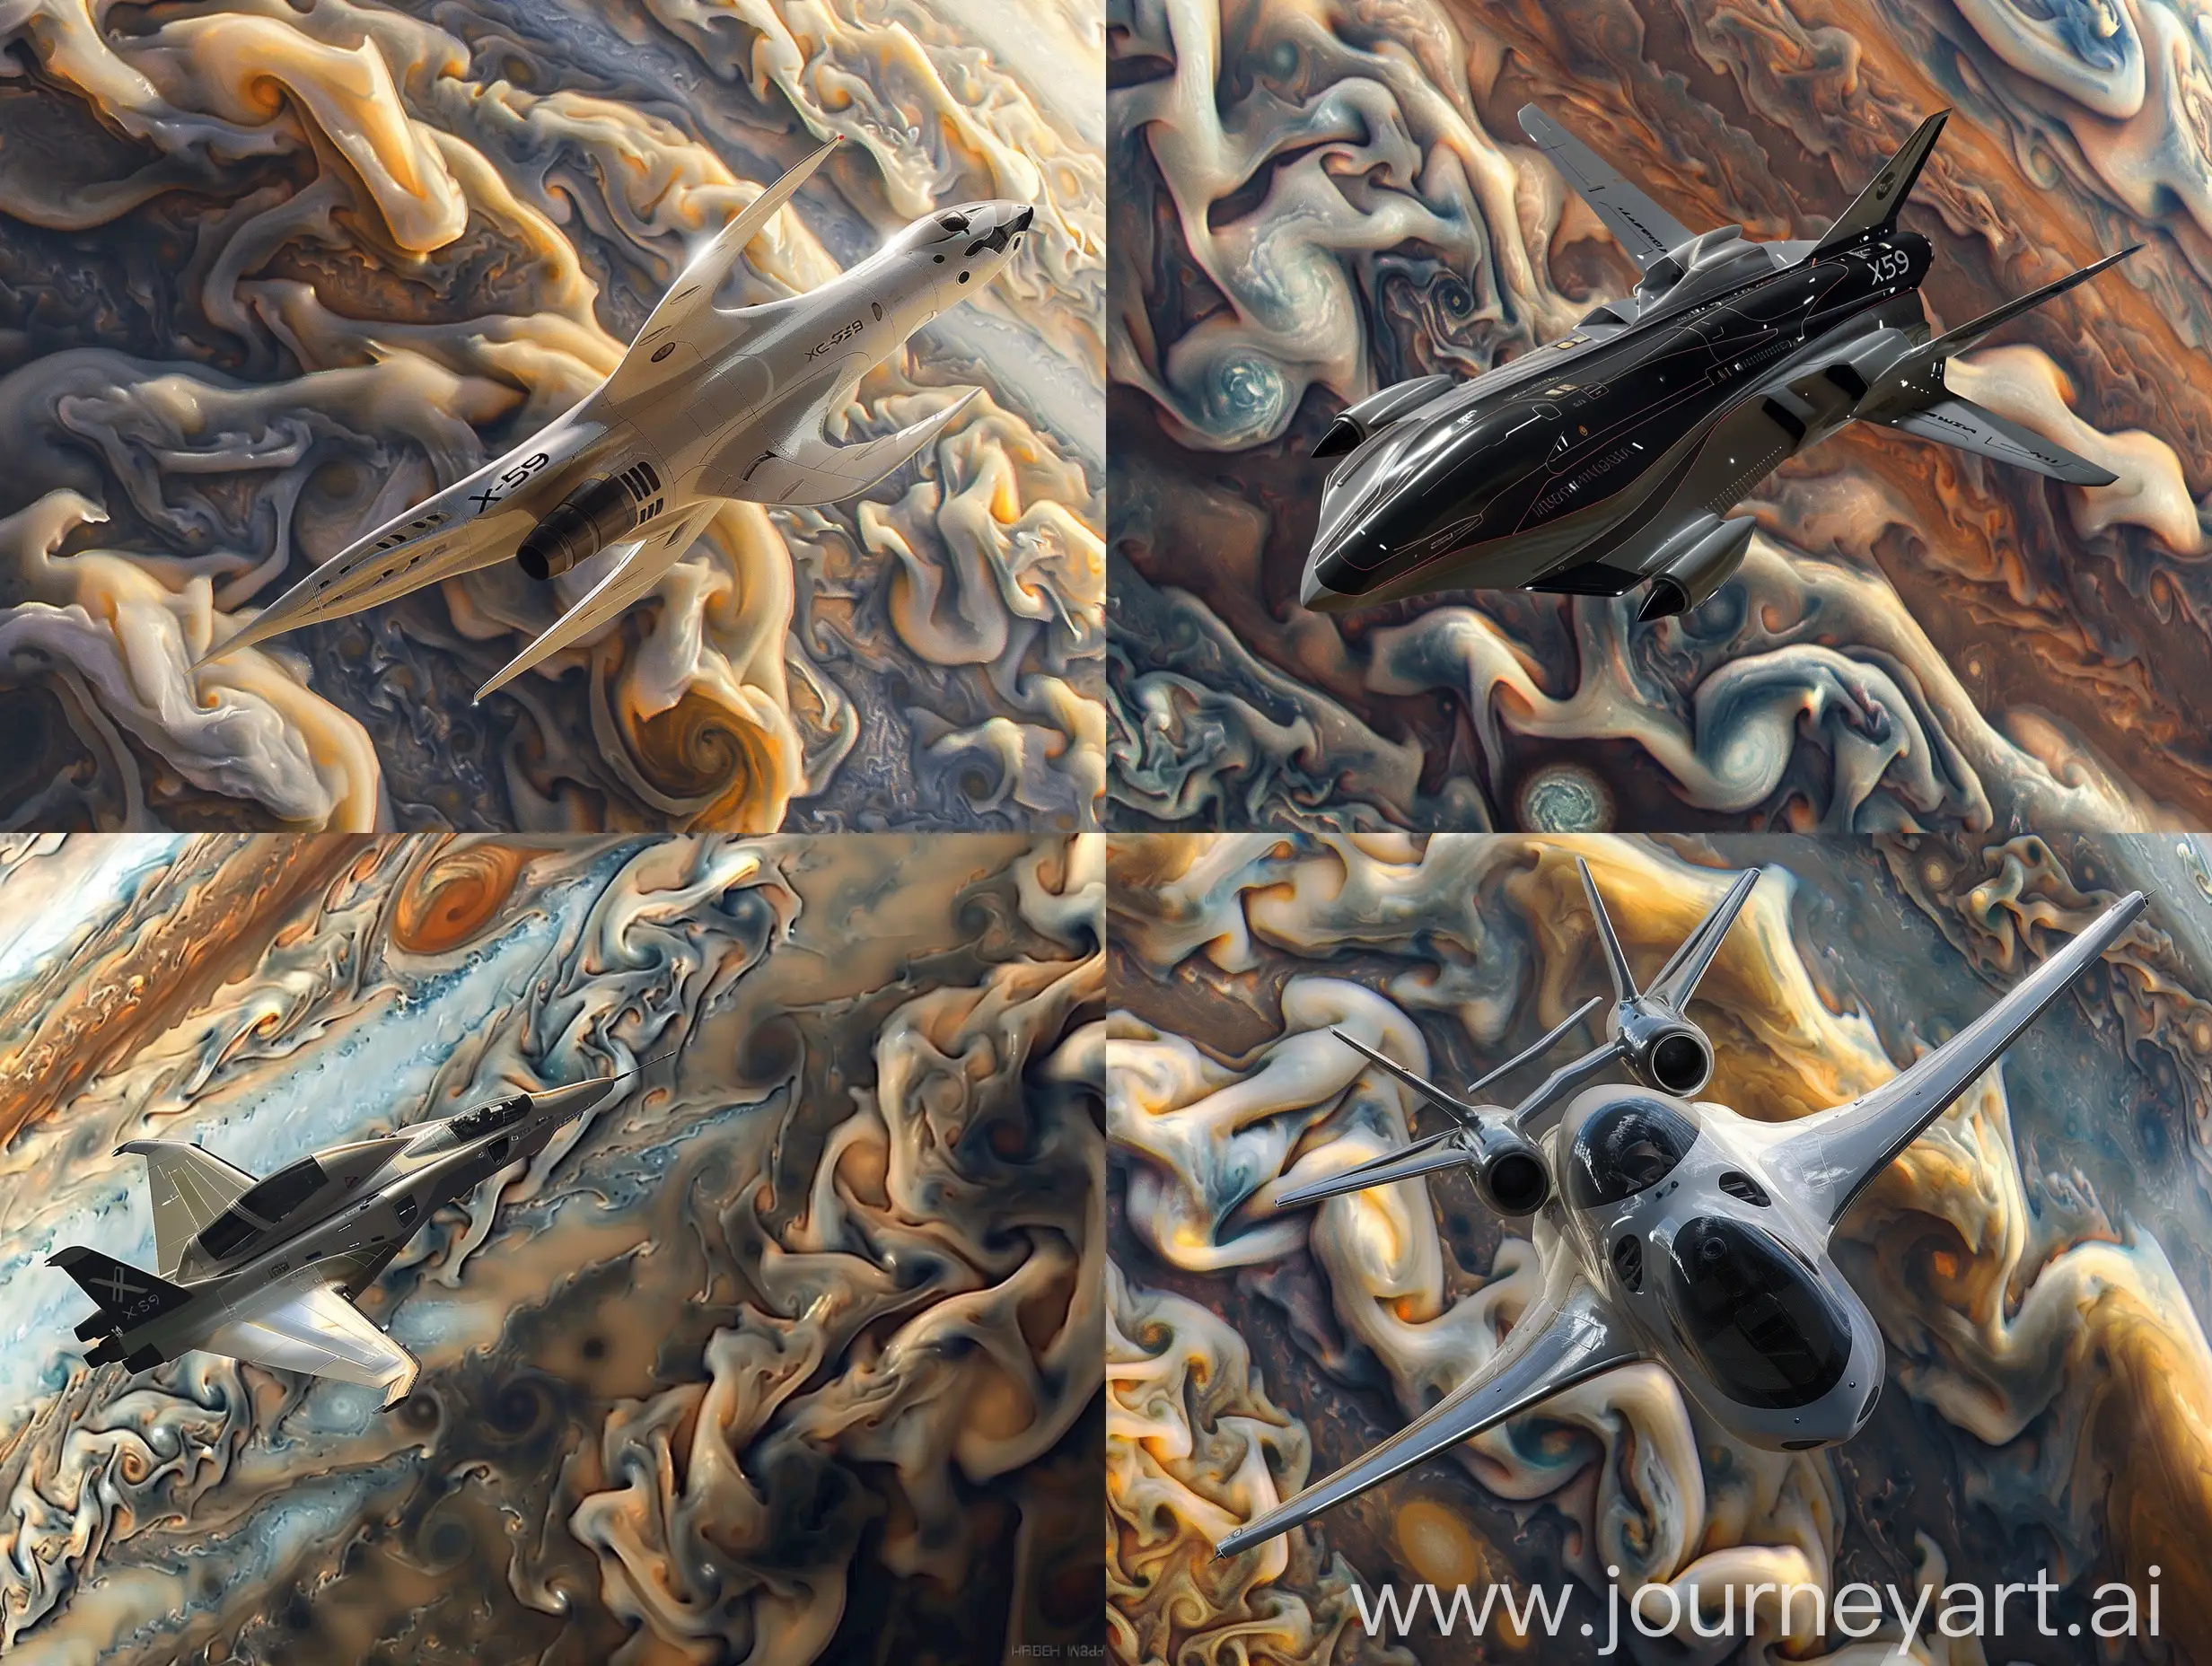 Futuristic-X59-Aircraft-Soaring-Above-Jupiters-Whirling-Cloud-Tornadoes